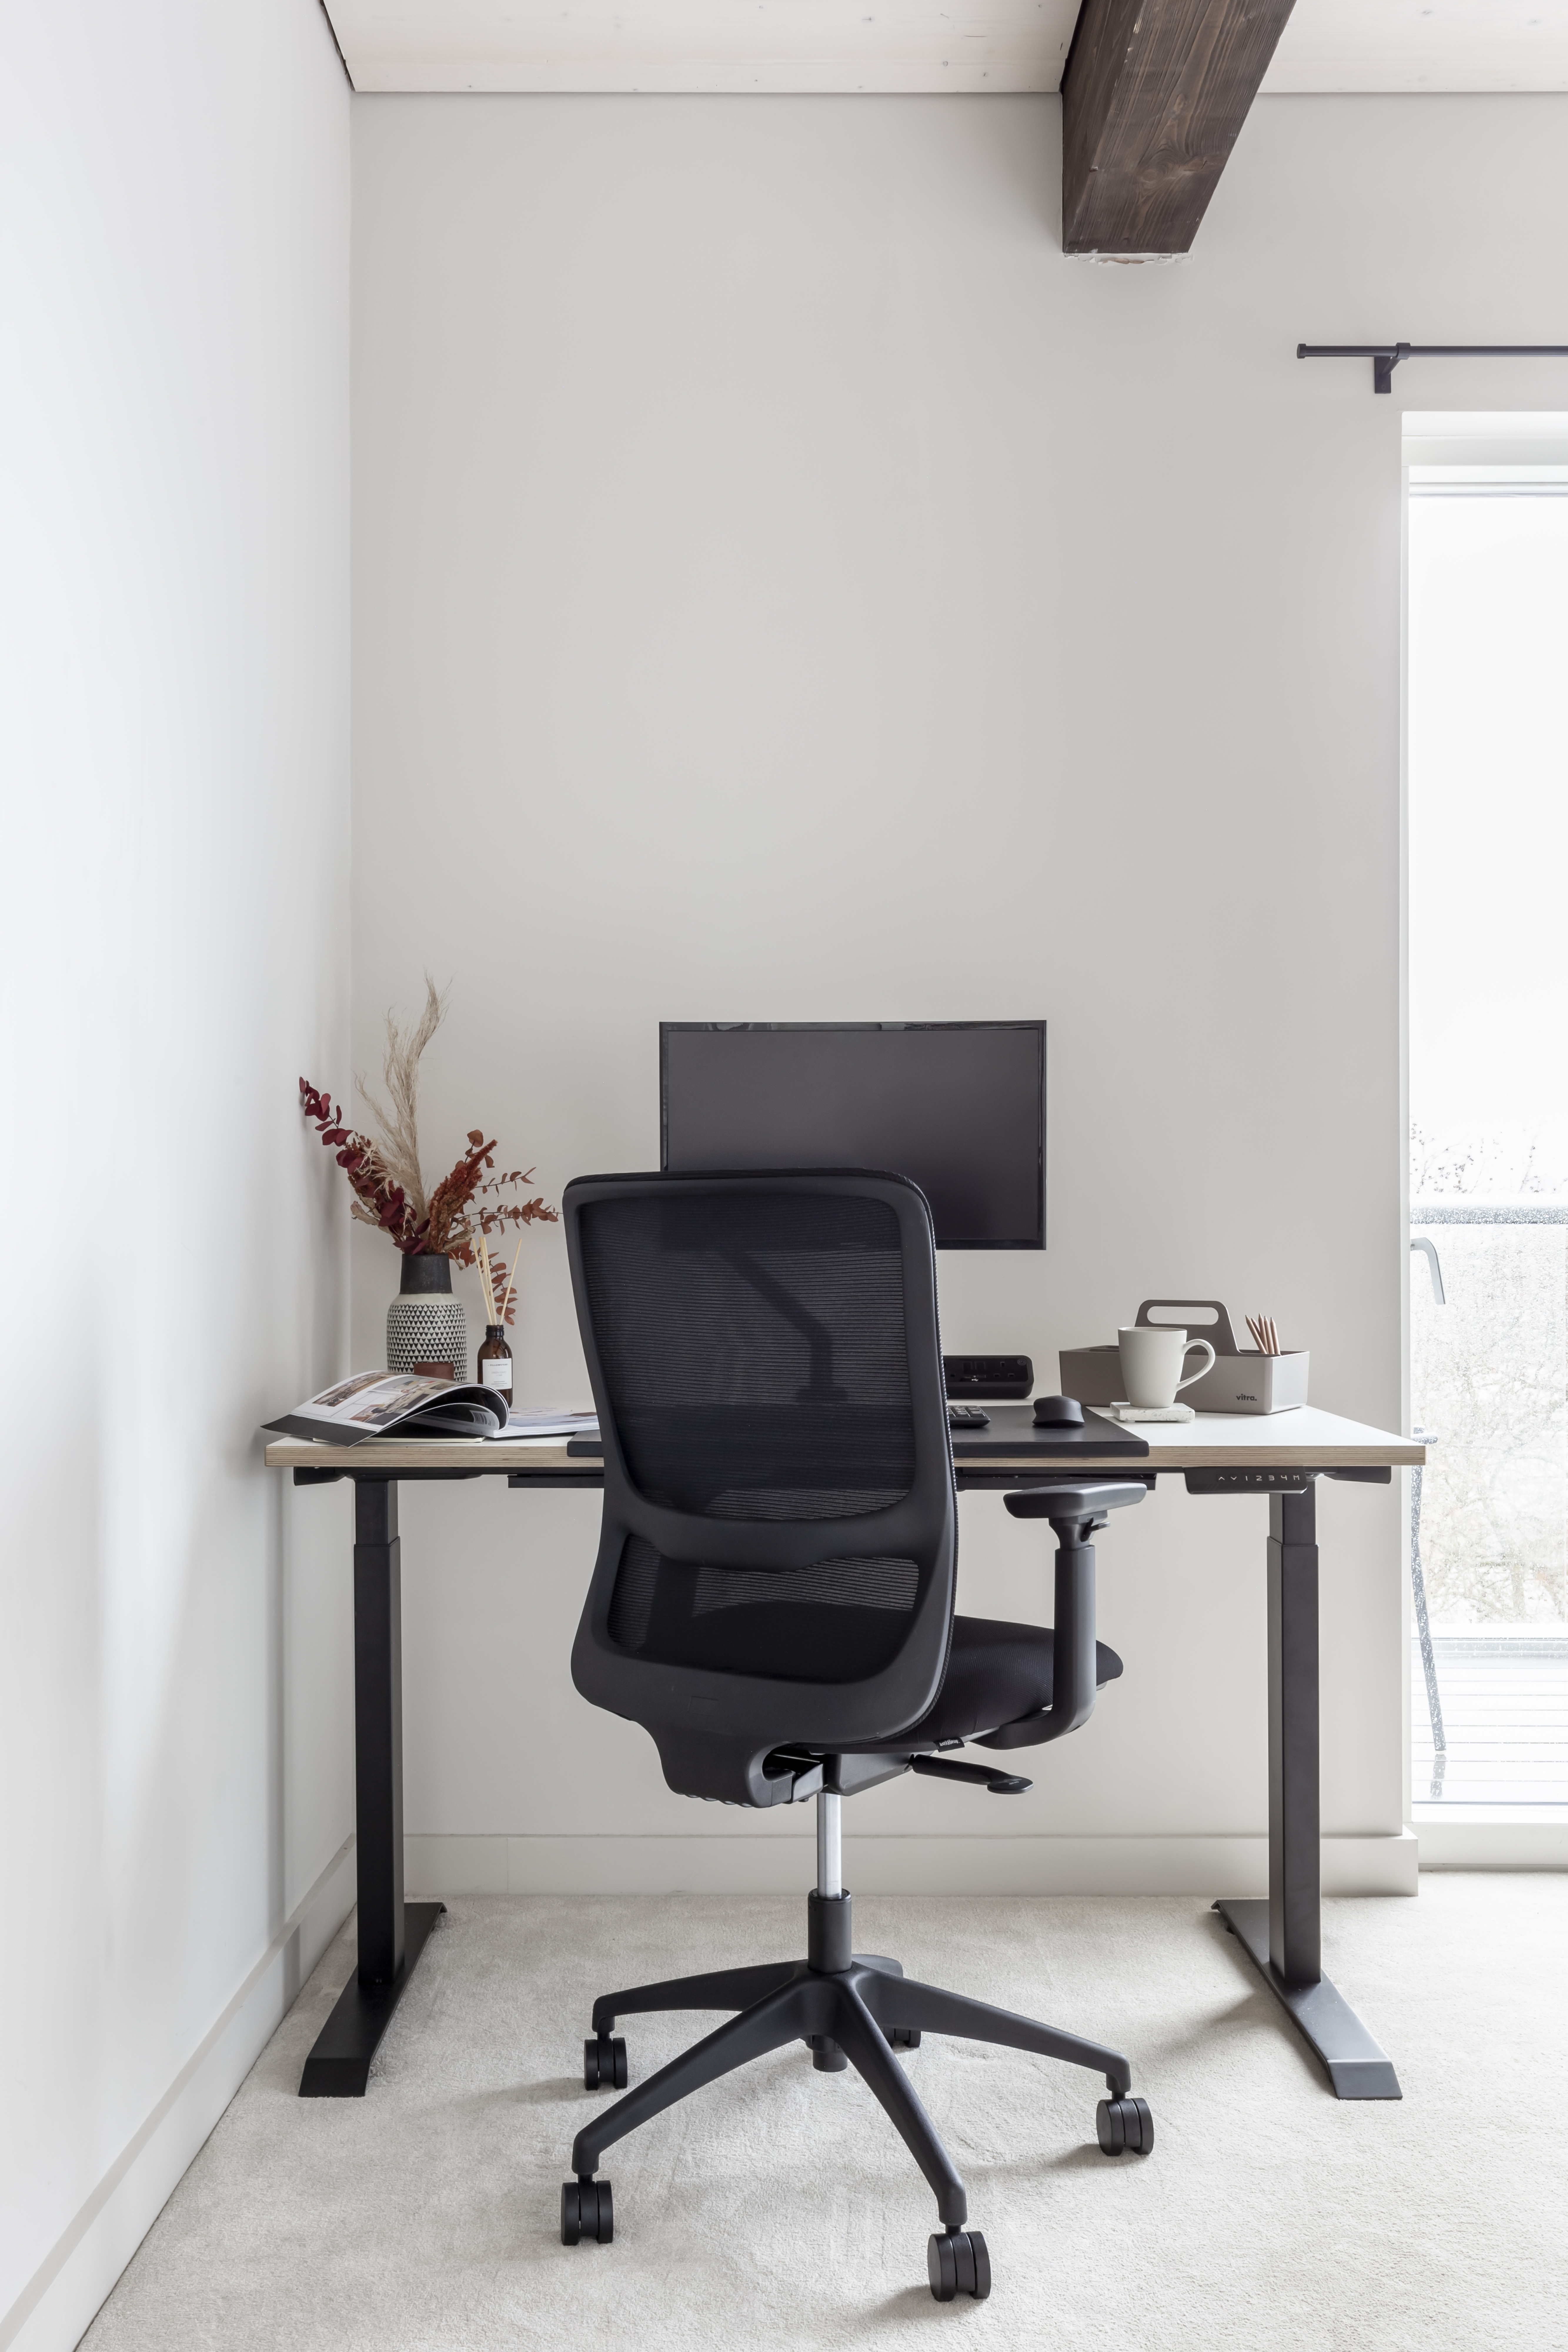 WS - Photoshoot - L21 task chair